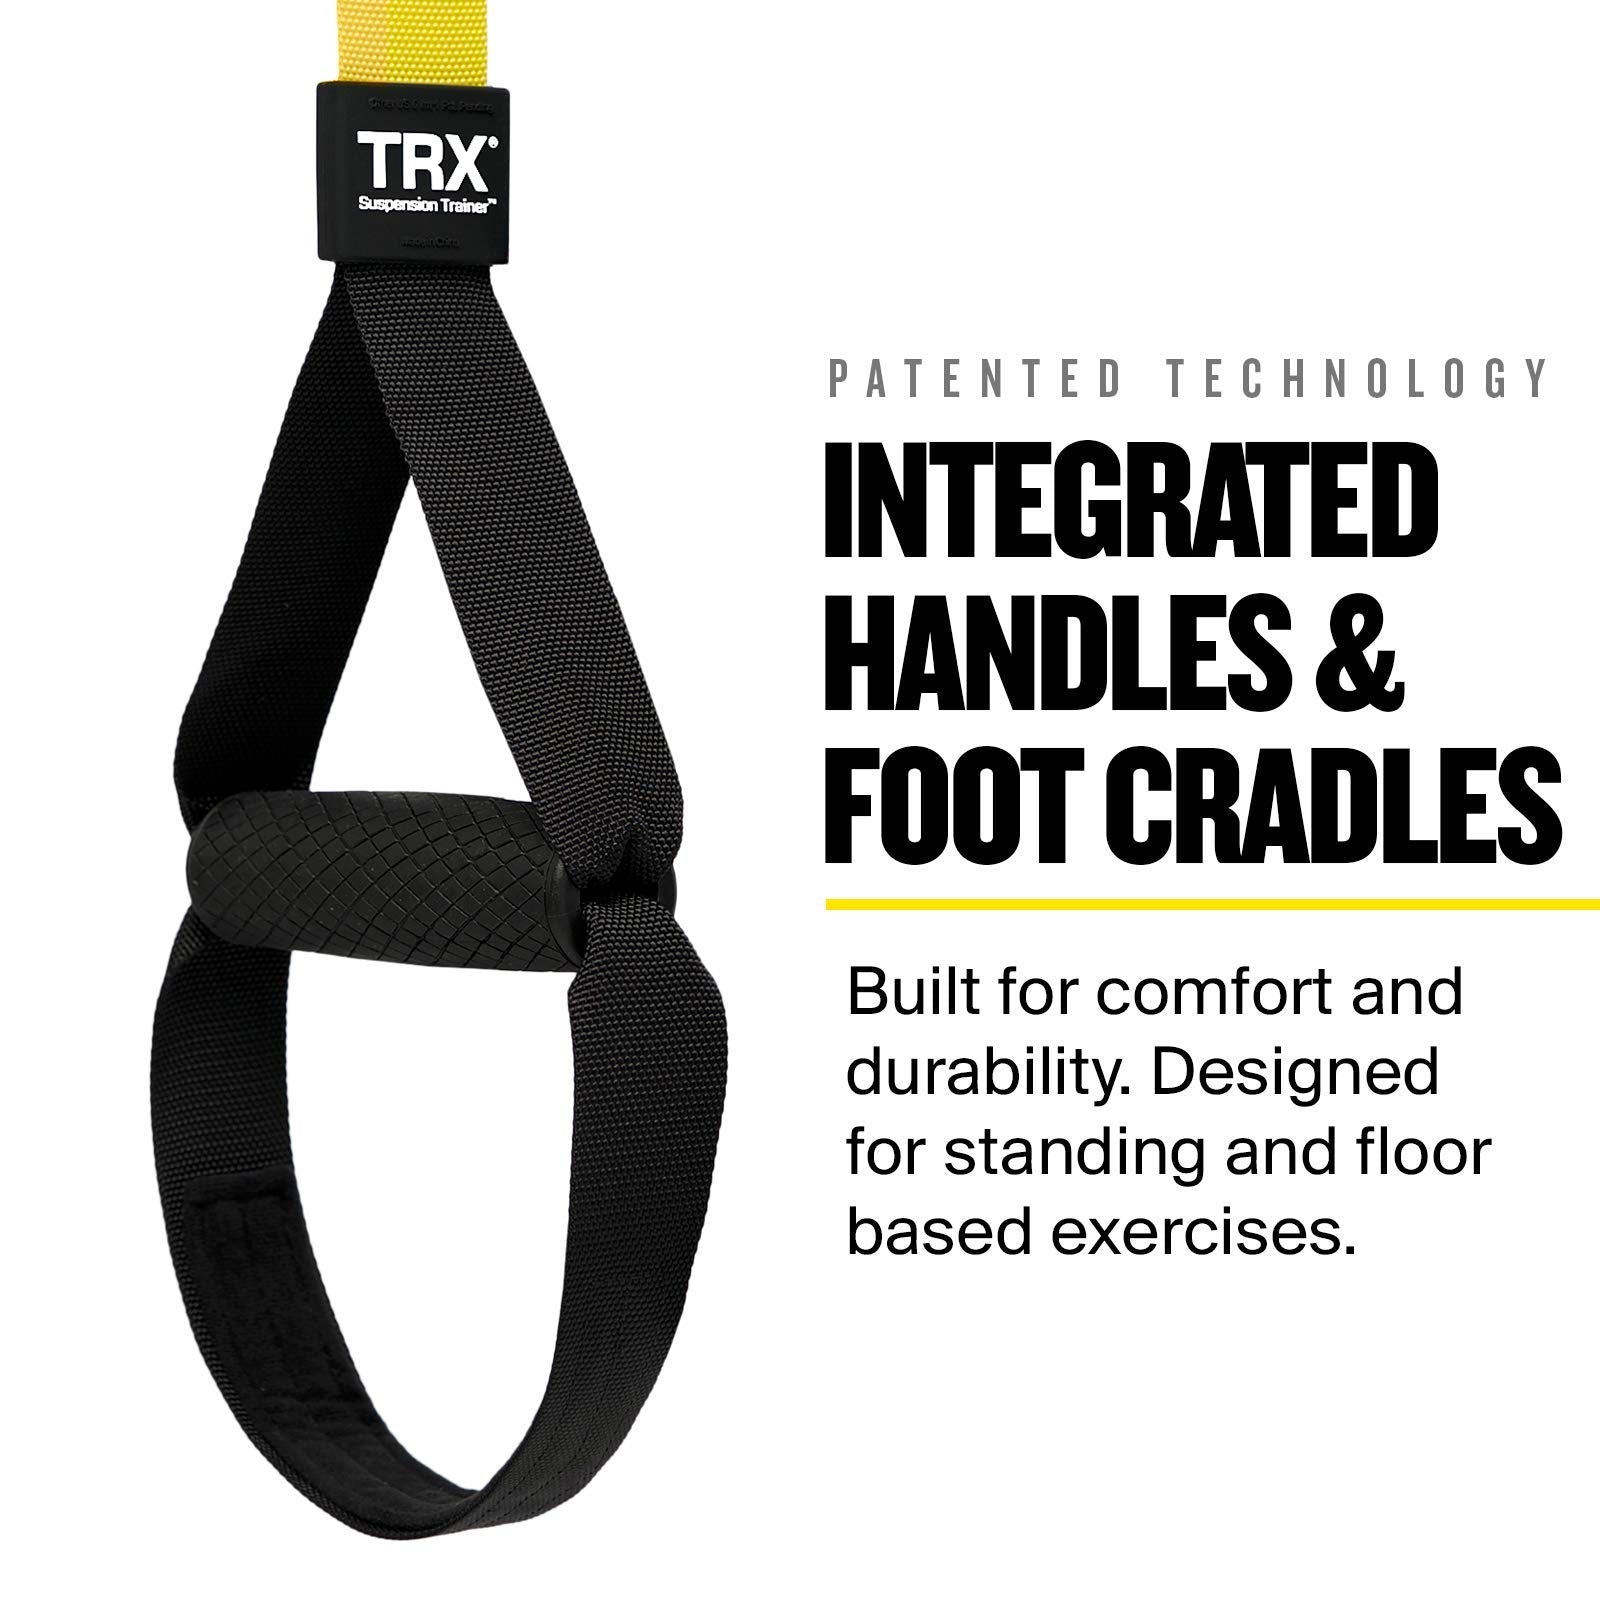 TRX PRO3 Suspension Trainer System Design & Durability| Includes Three Anchor Solutions, 8 Video Workouts & 8-Week Workout Program - yrGear Australia